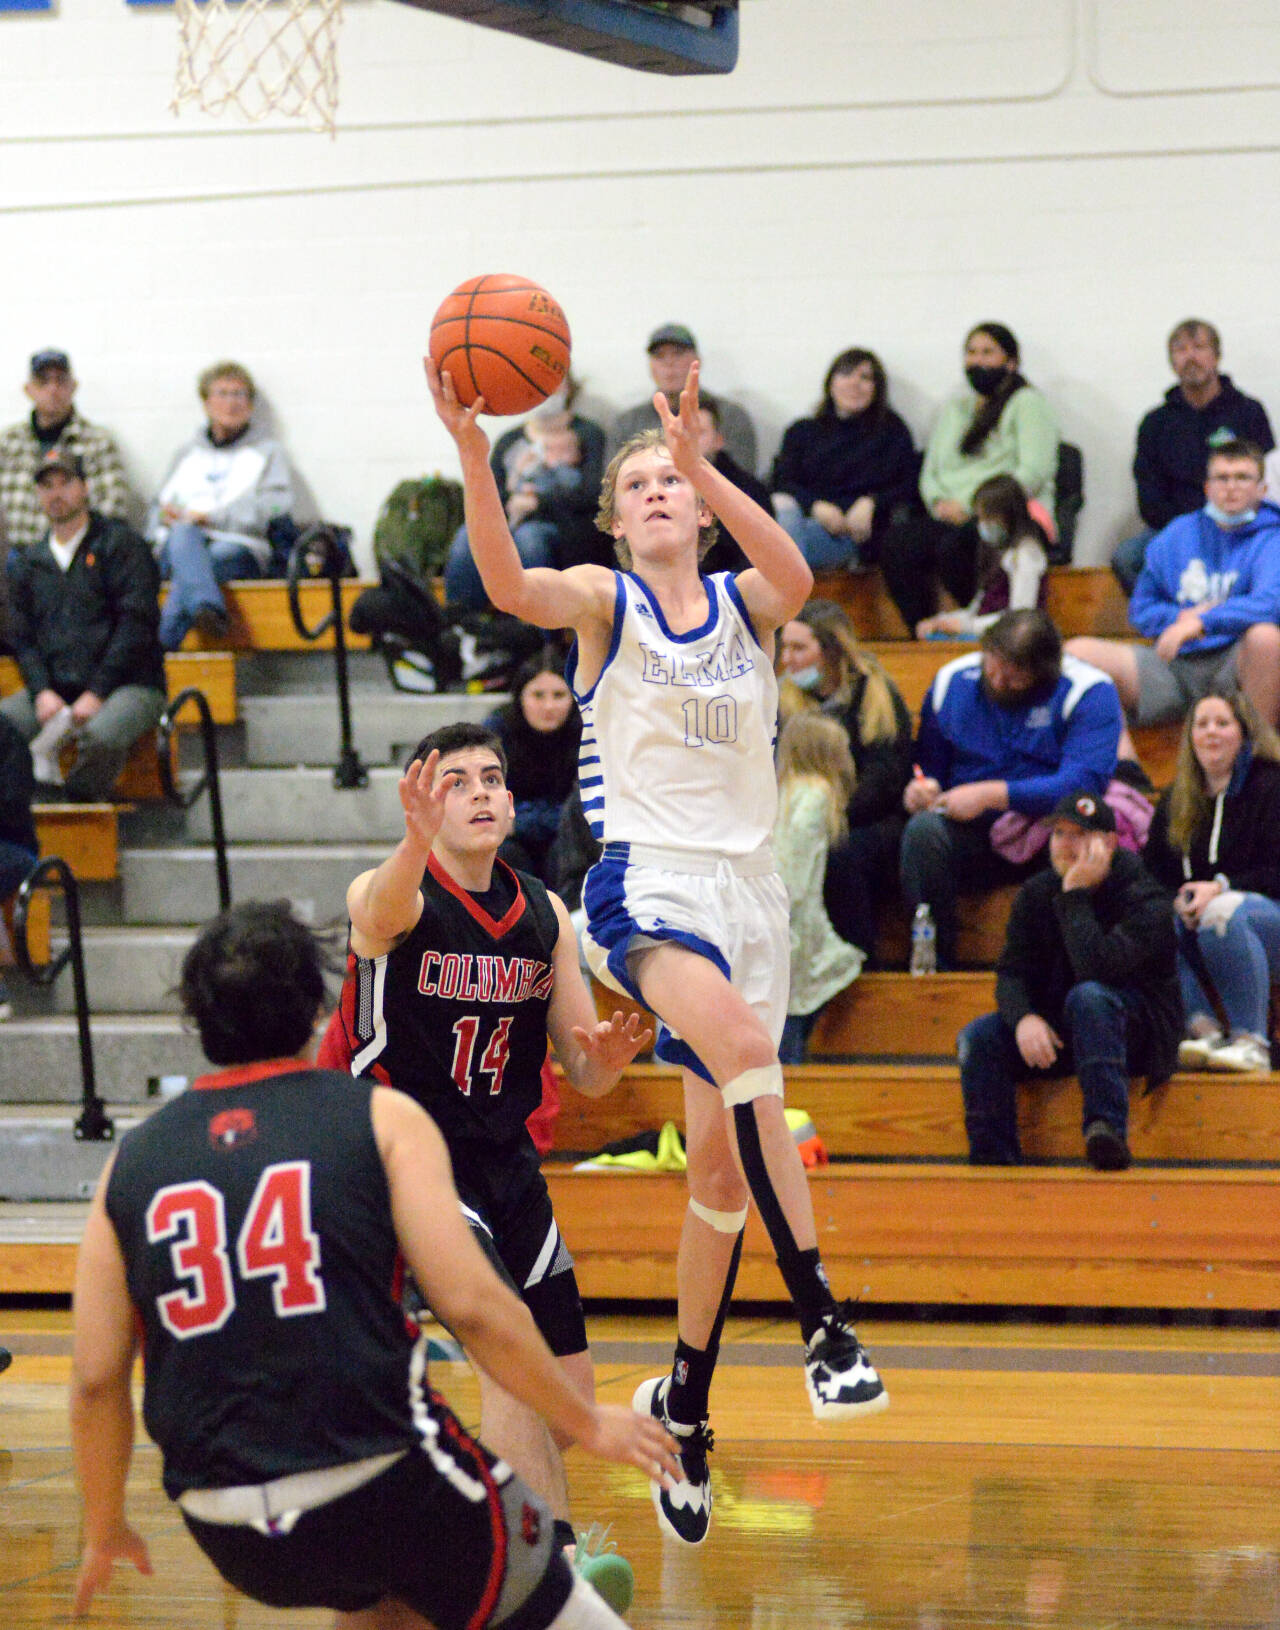 RYAN SPARKS | THE DAILY WORLD
Elma's Cason Seaberg (10) drives to the basket against Columbia-White Salmon's Dylan Connely (14) during the Eagles 69-46 victory on Friday in Elma.